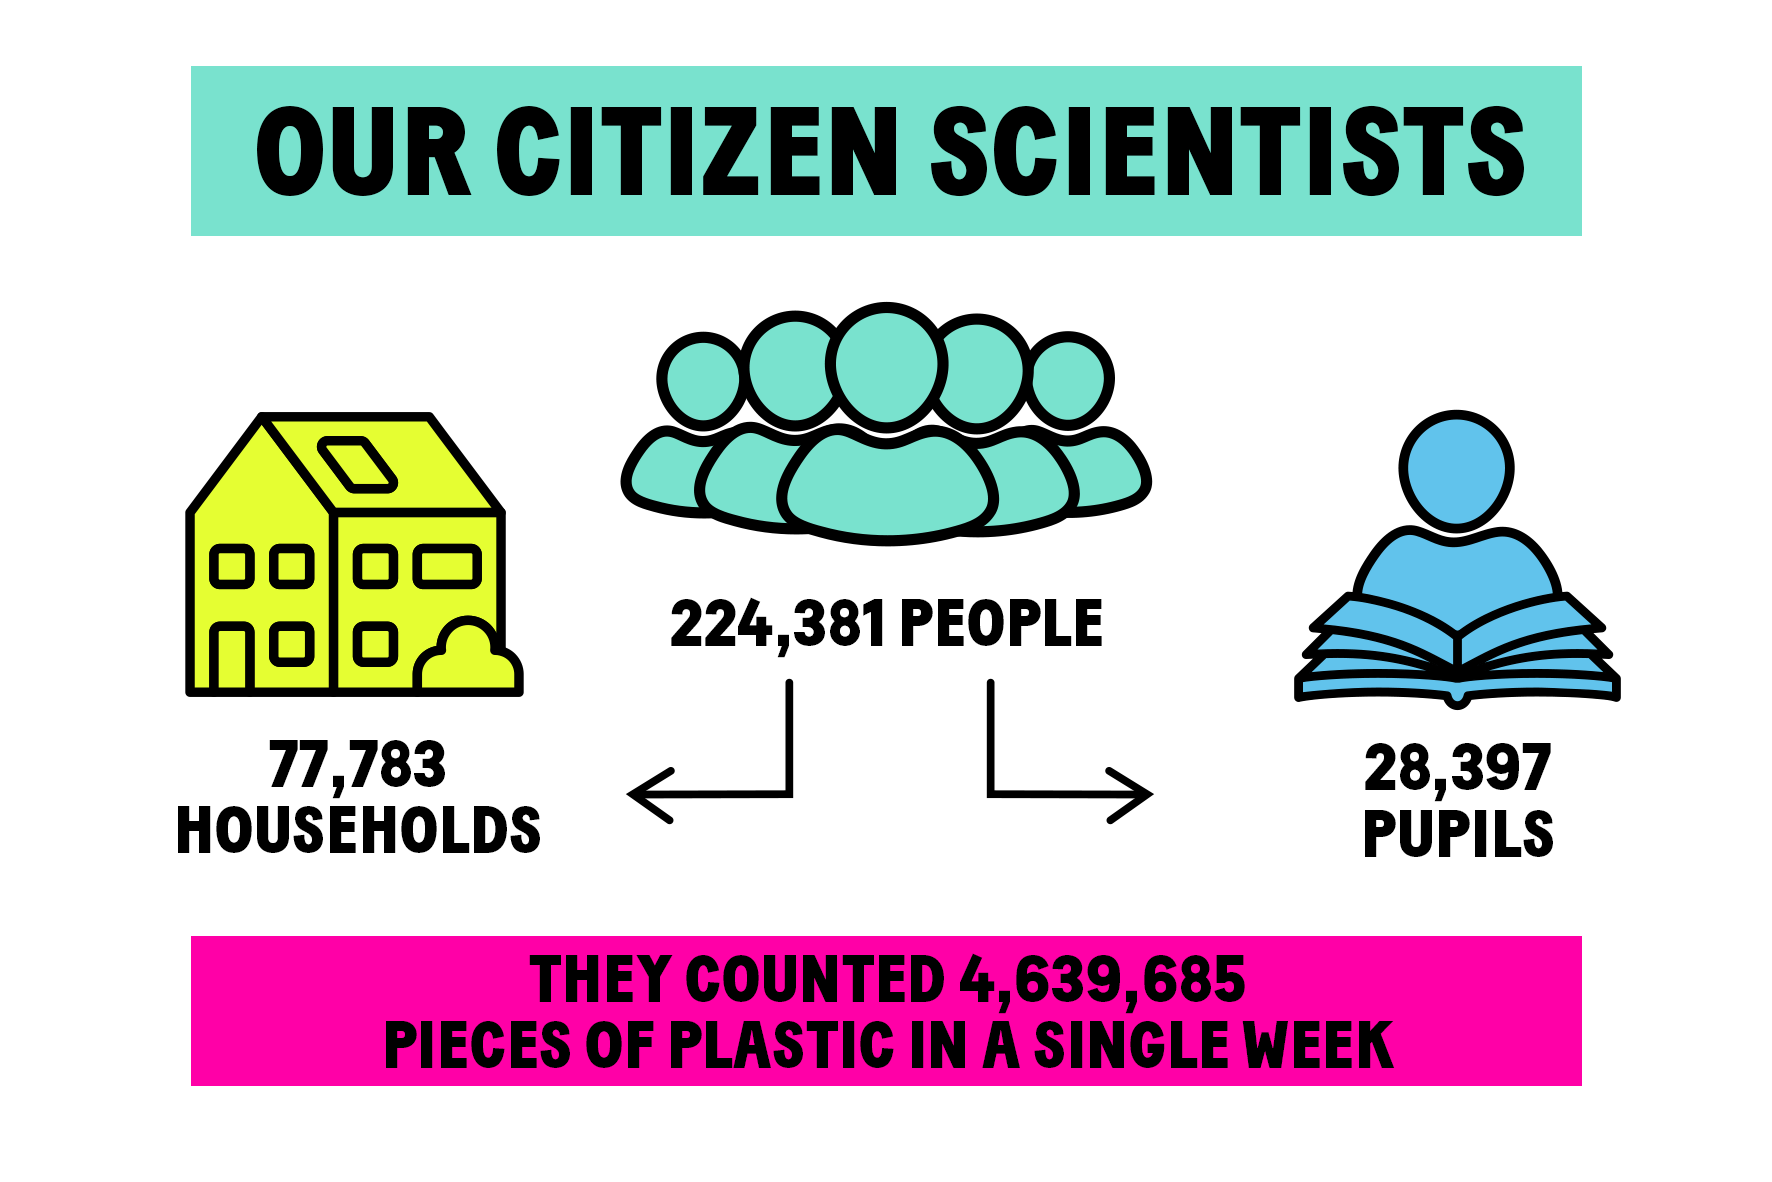 Our citizen scientists: together they counted 4,639,685 pieces of plastic in a single week